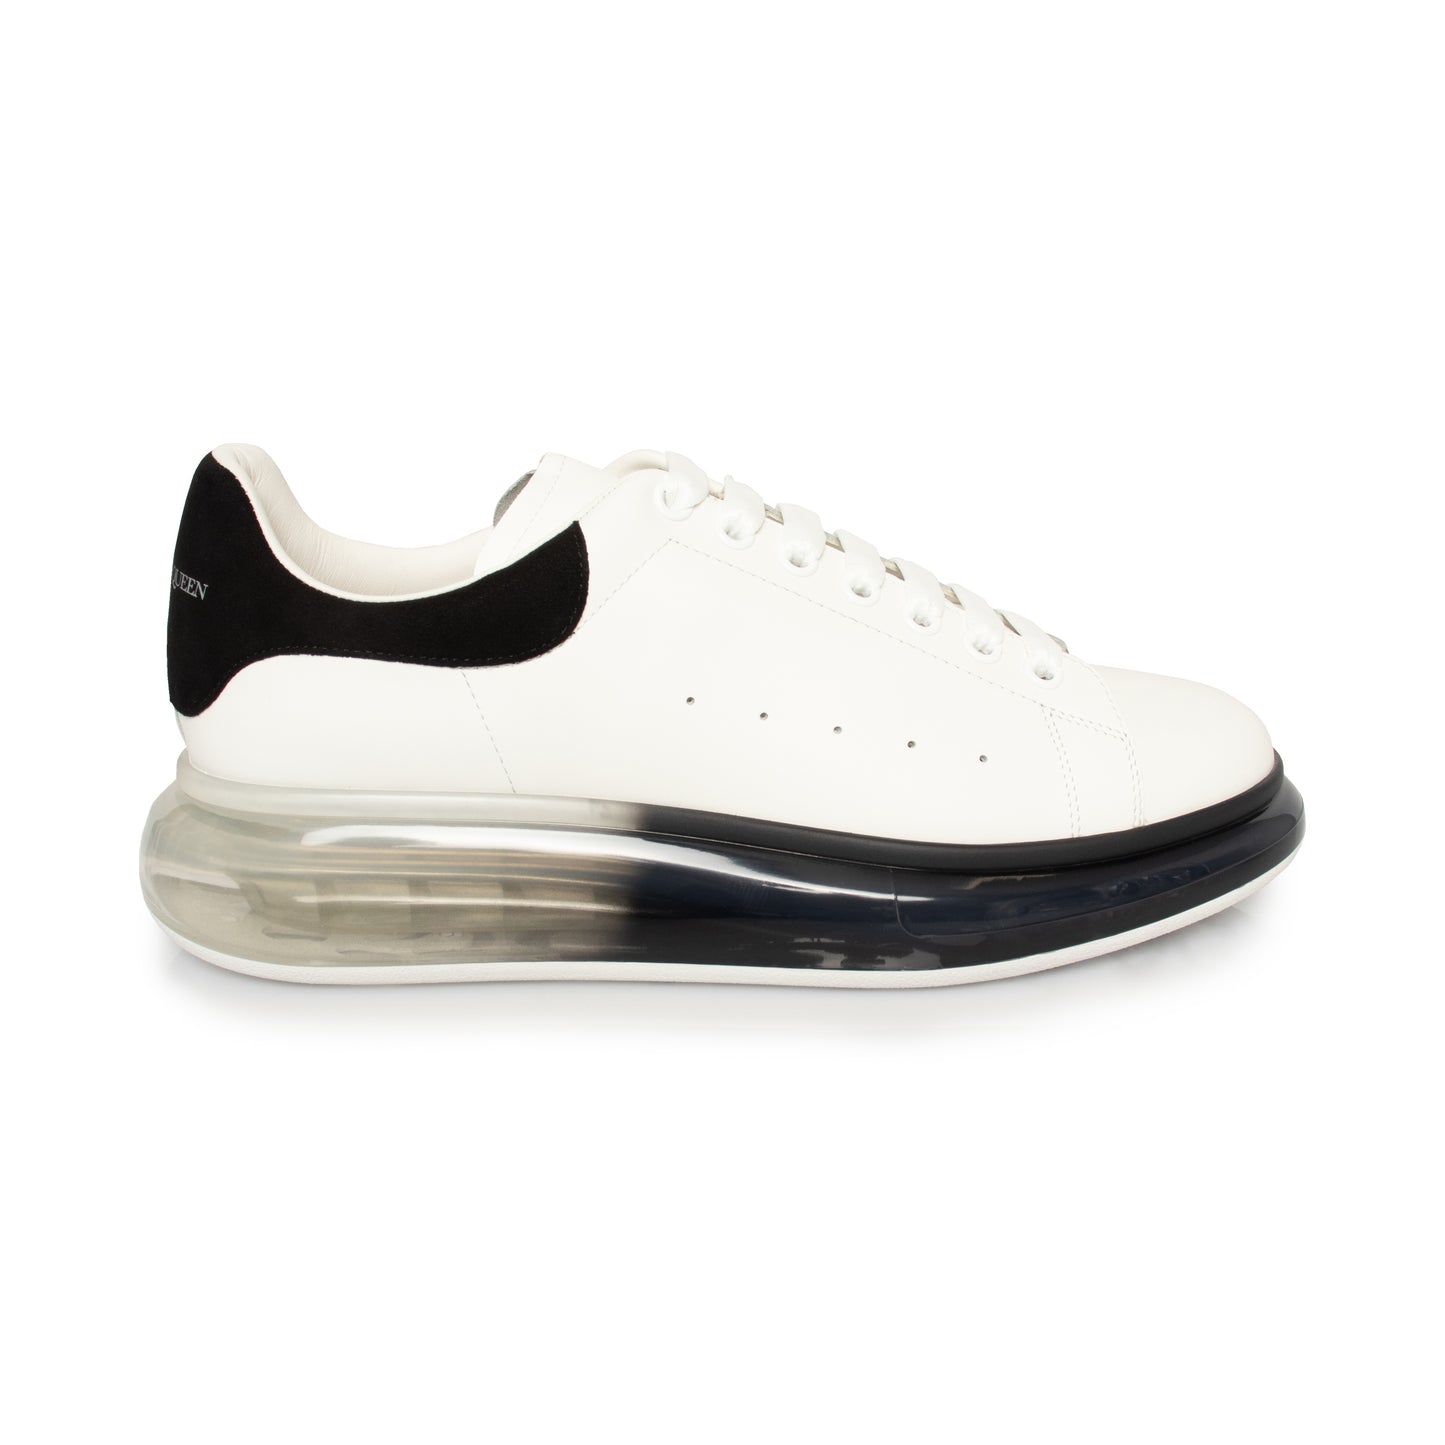 Larry Transparent Sole Sneaker in White/Black Suede